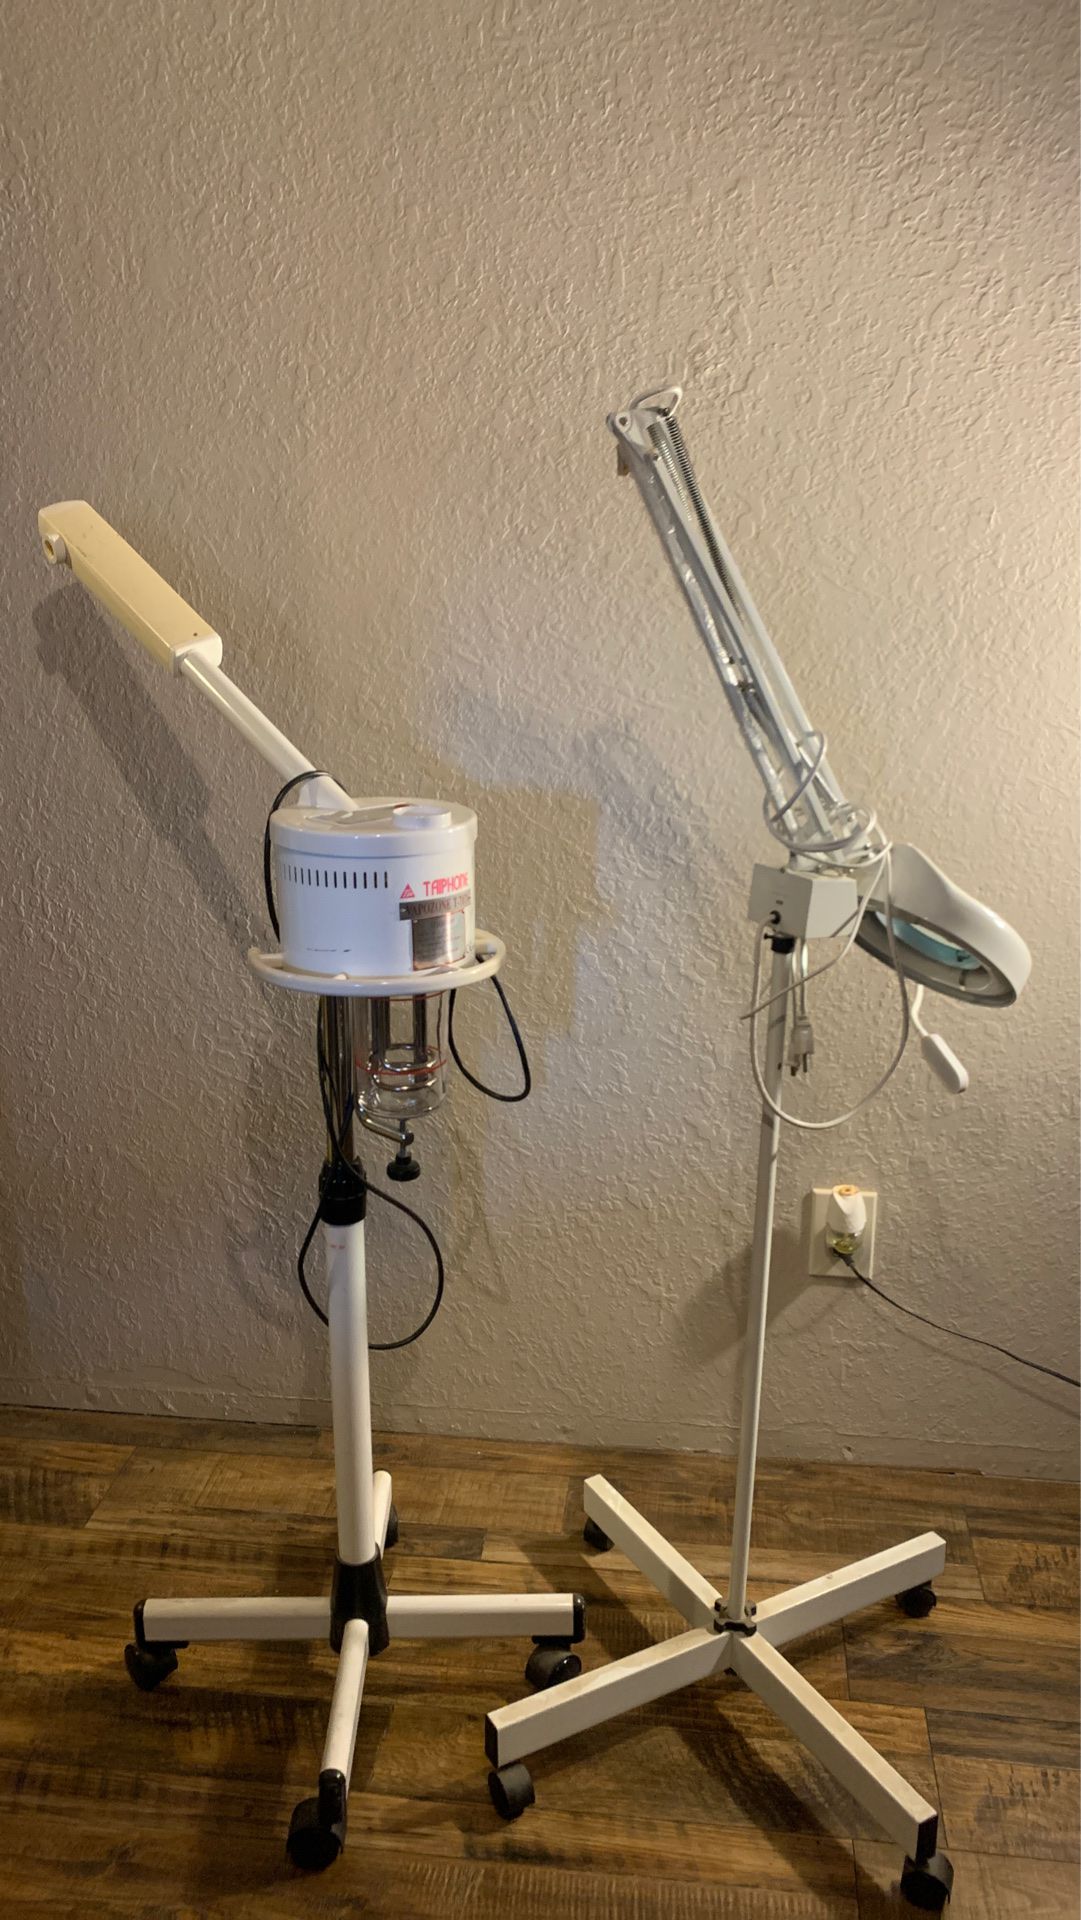 Vapozone T-707A (Facial Steamer), Lite Source Magnifying Lamp